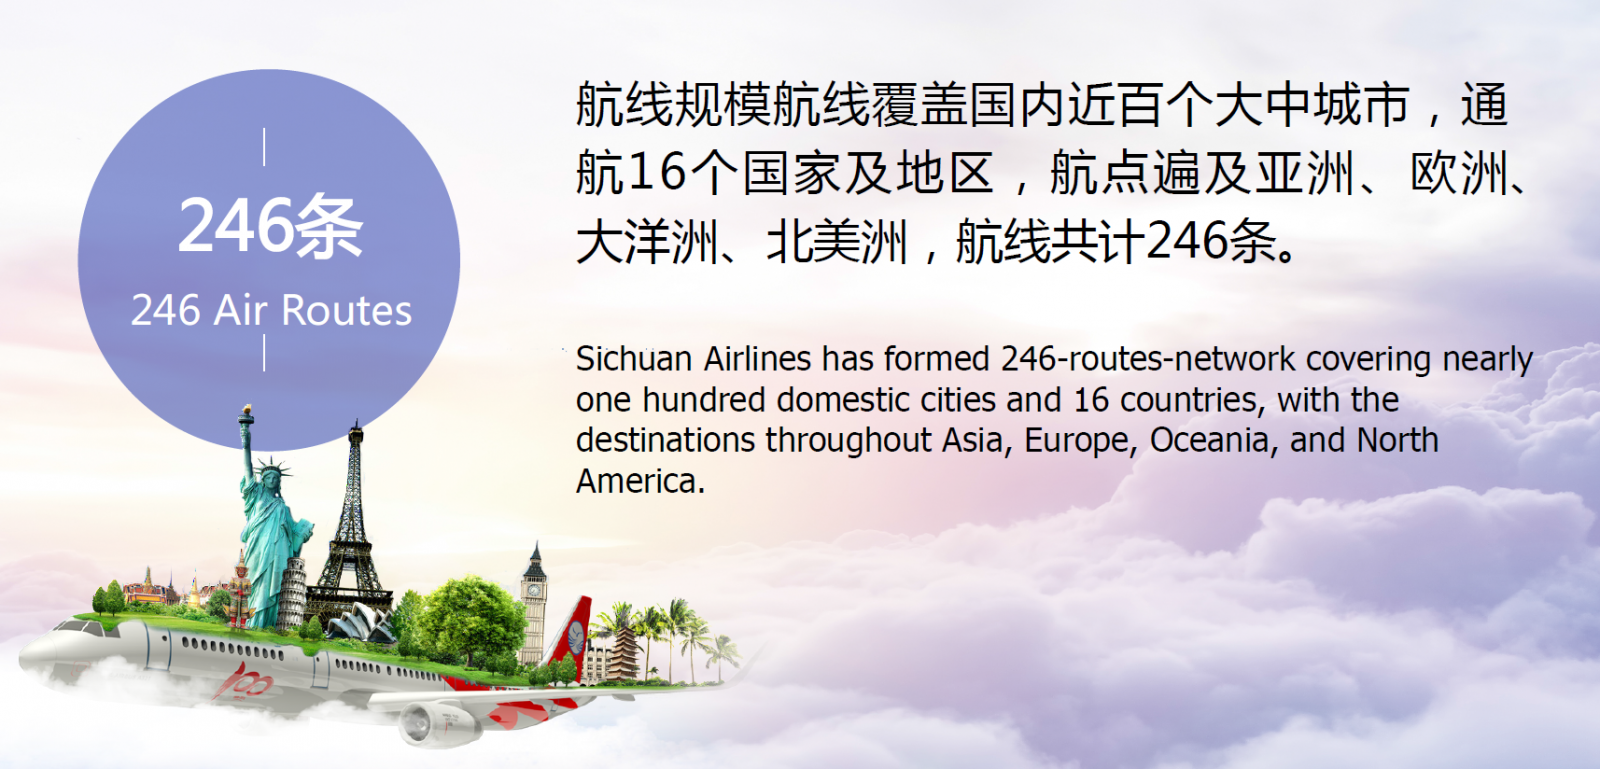 routes of Sichuan airlines advertisement